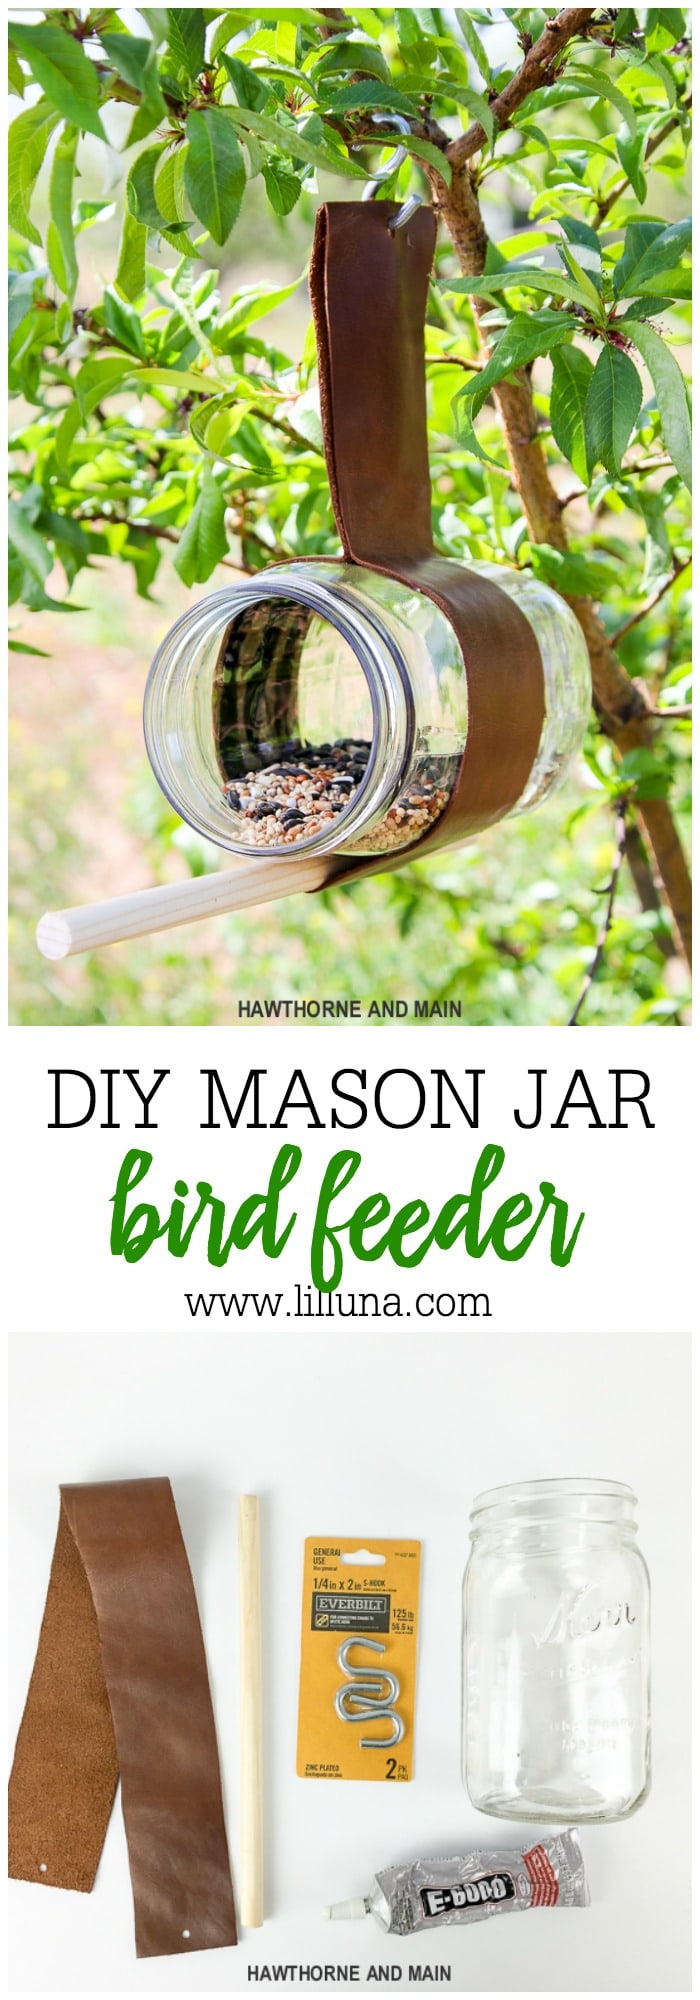 Check out this easy DIY Bird Feeder. What a fun way to get the kids outside and excited about seeing birds. This one looks like a great project! 